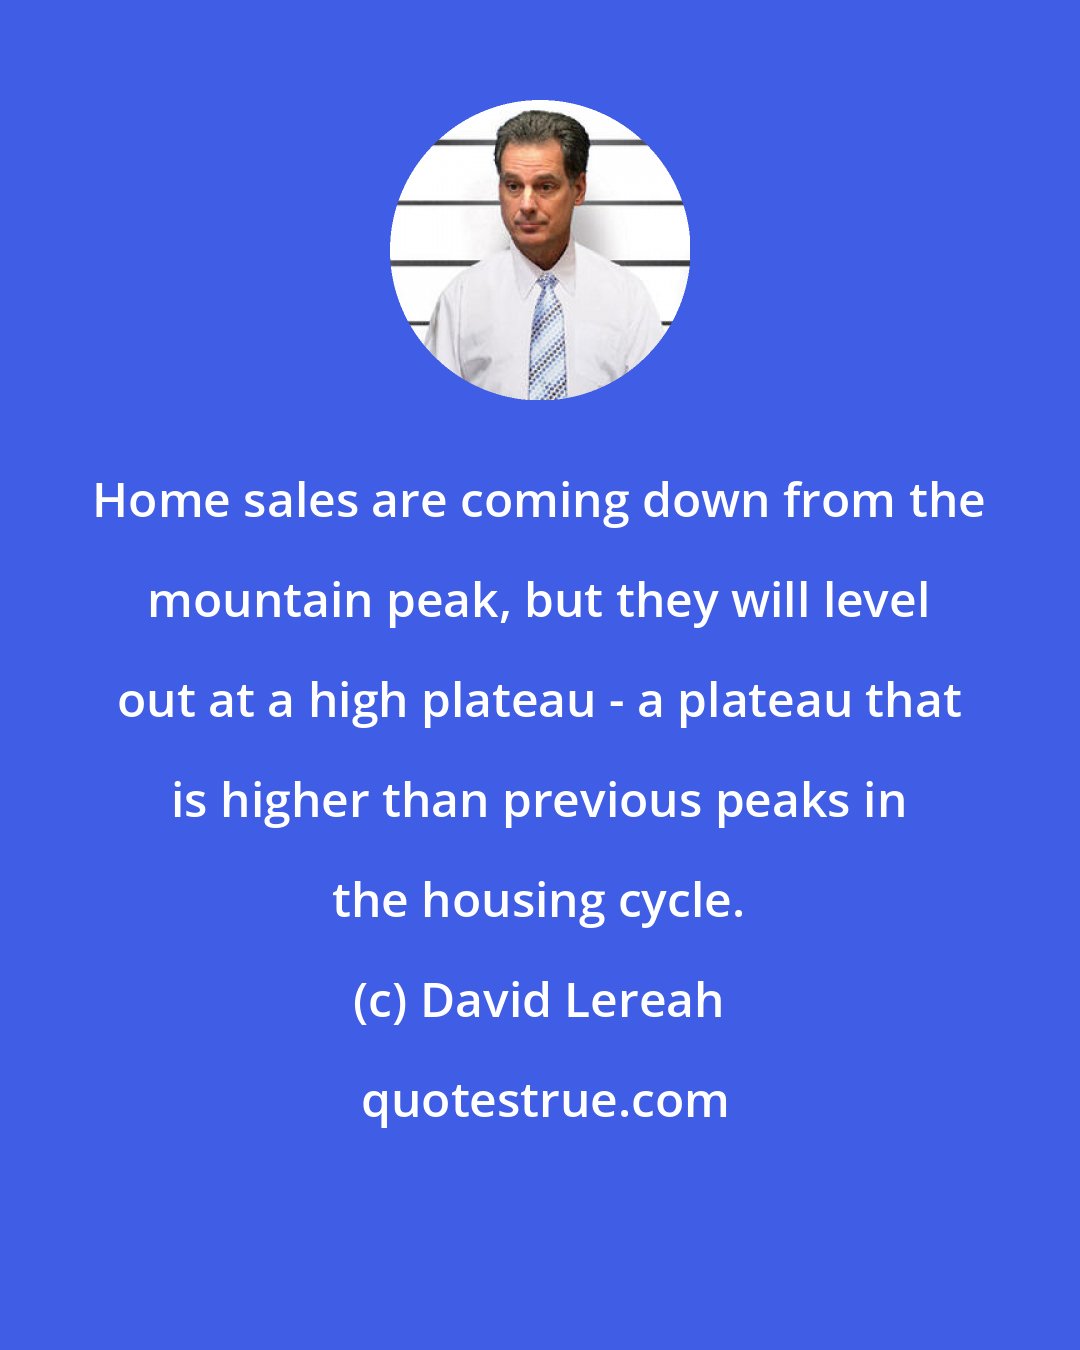 David Lereah: Home sales are coming down from the mountain peak, but they will level out at a high plateau - a plateau that is higher than previous peaks in the housing cycle.